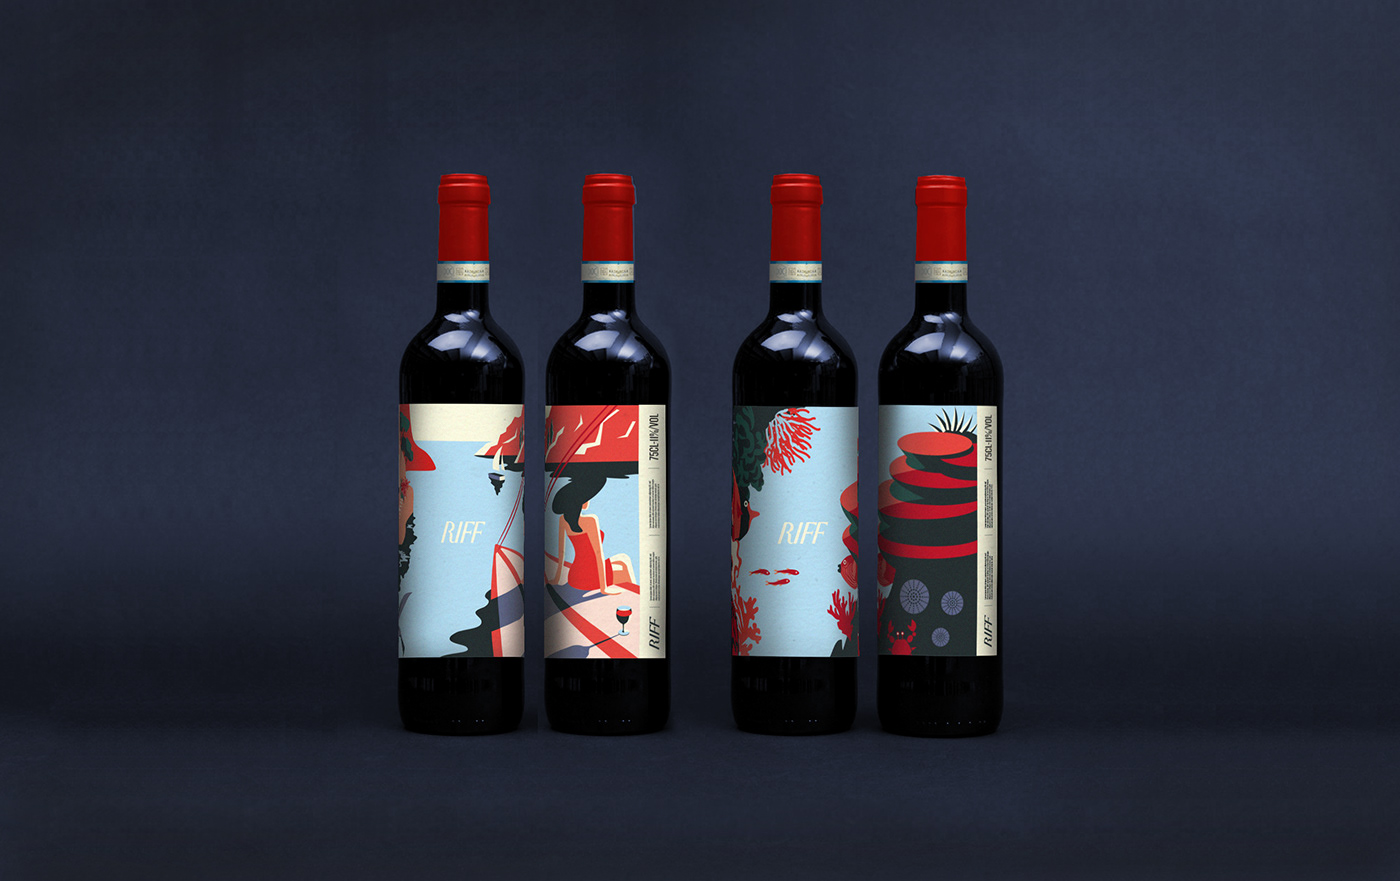 Italy wine winelabel Nature illustrations Holiday risography Packaging ILLUSTRATION  Flora and Fauna mediterranean